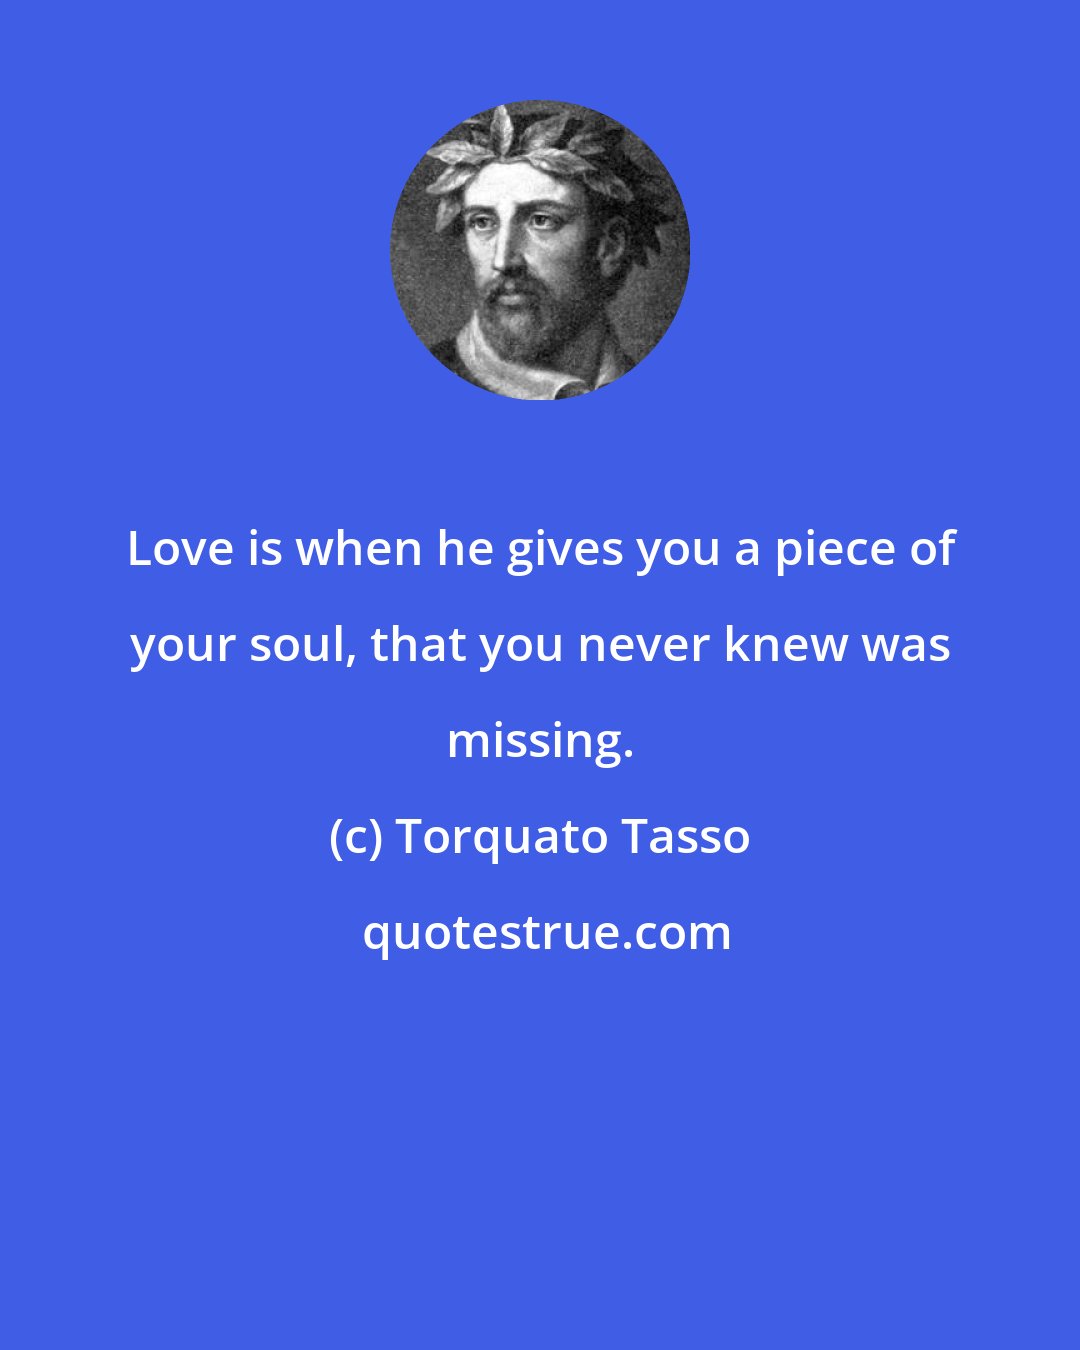 Torquato Tasso: Love is when he gives you a piece of your soul, that you never knew was missing.